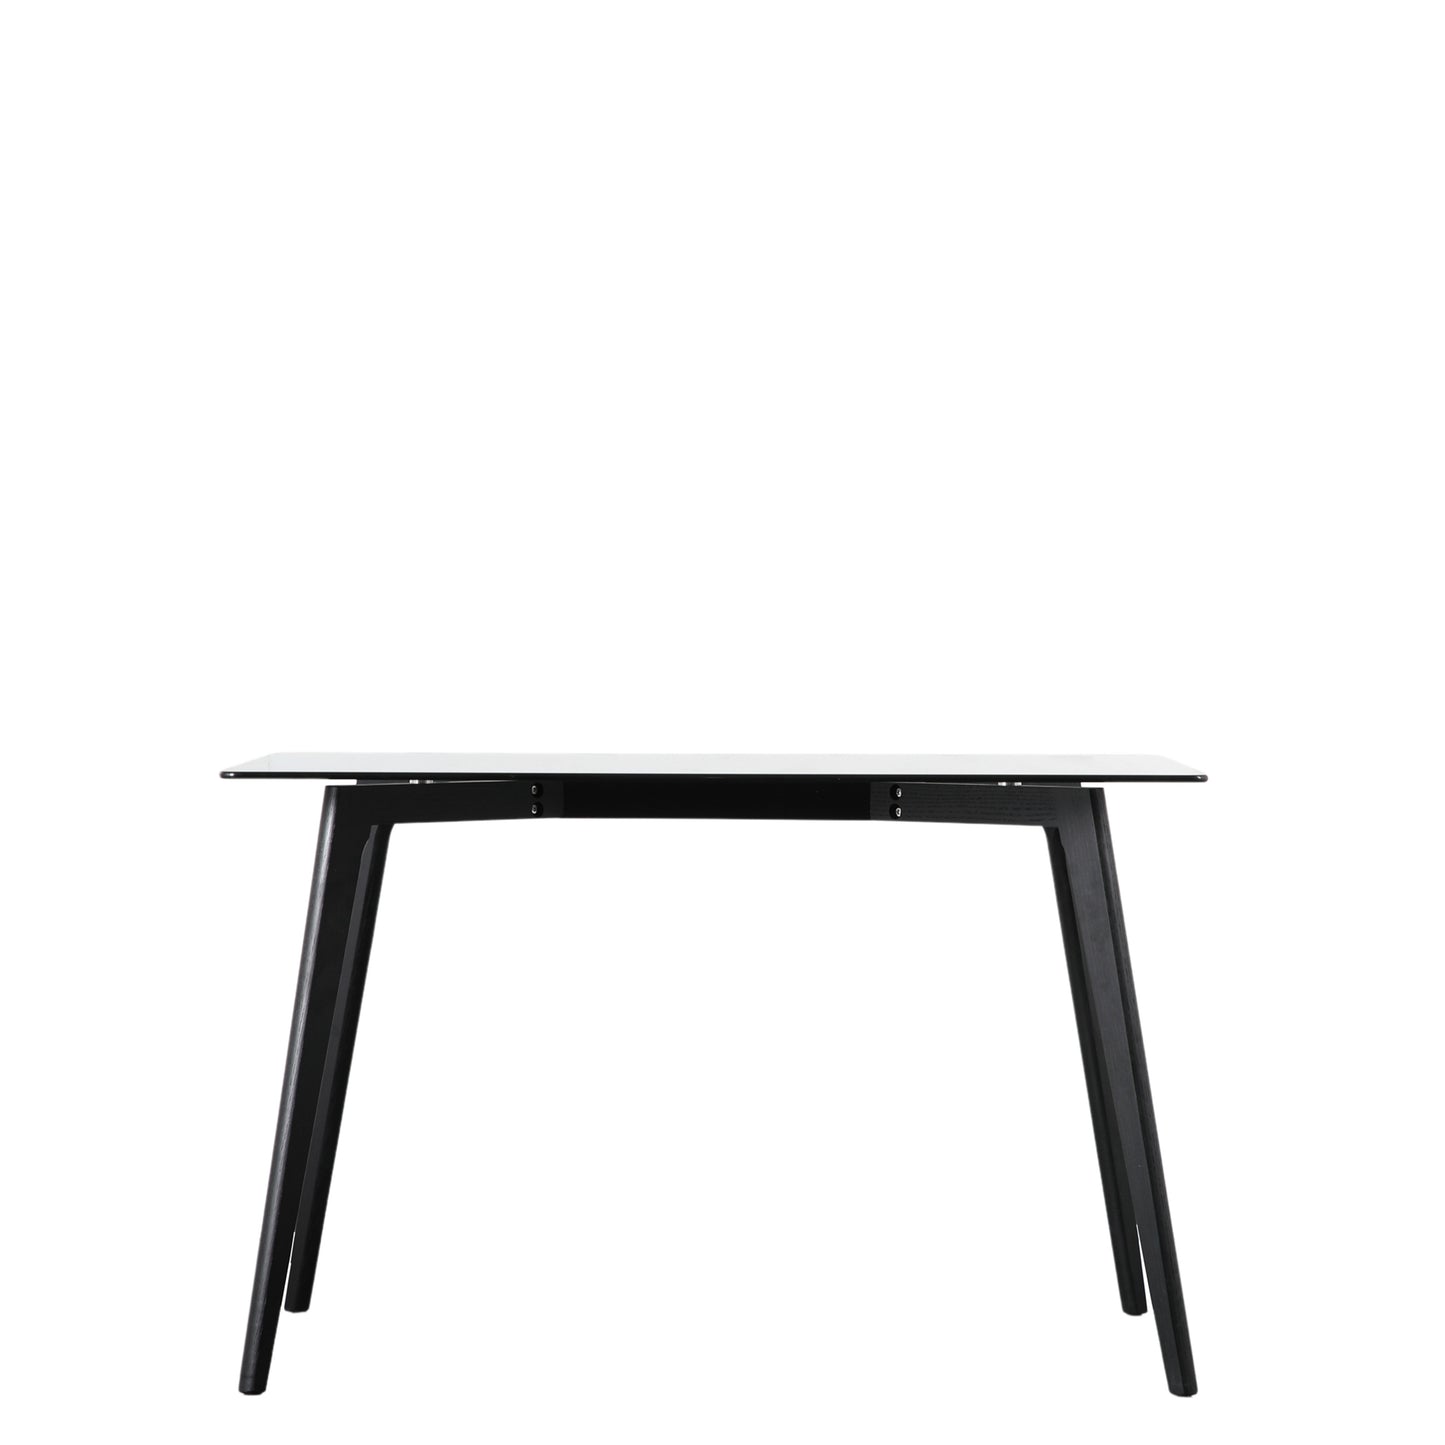 A black rectangle dining table with a glass top for interior decor from Kikiathome.co.uk.